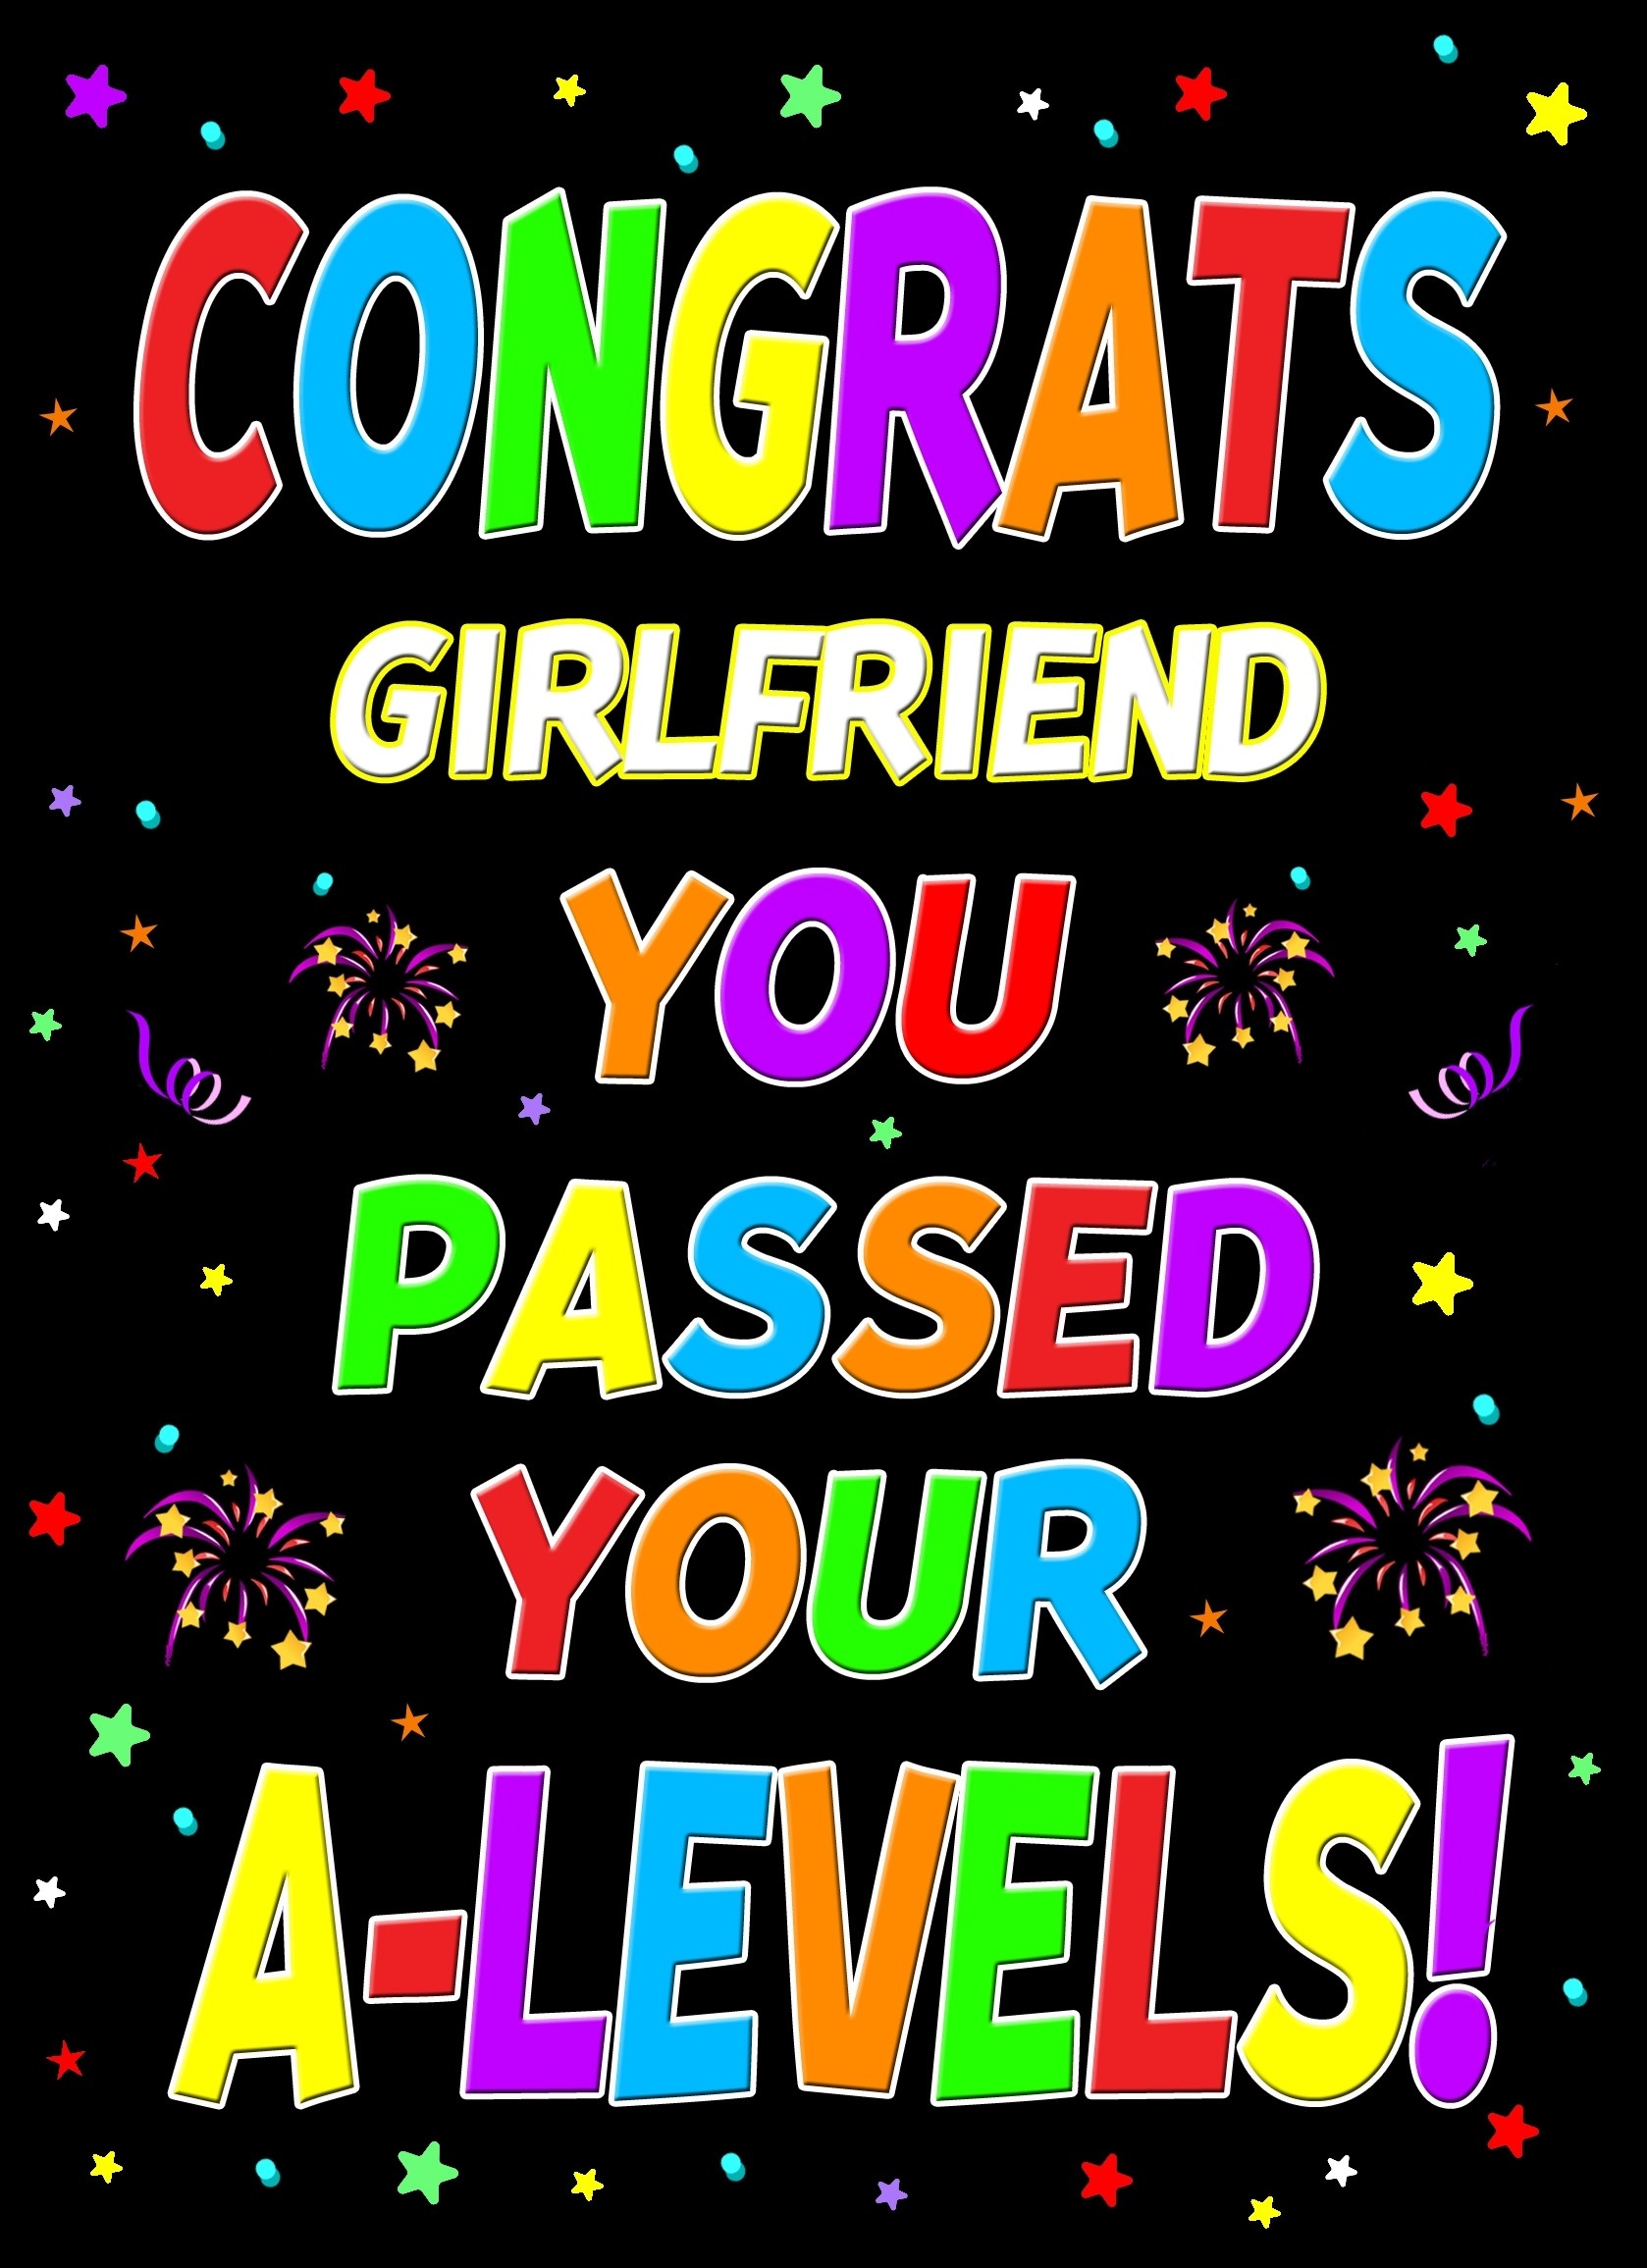 Congratulations A Levels Passing Exams Card For Girlfriend (Design 1)